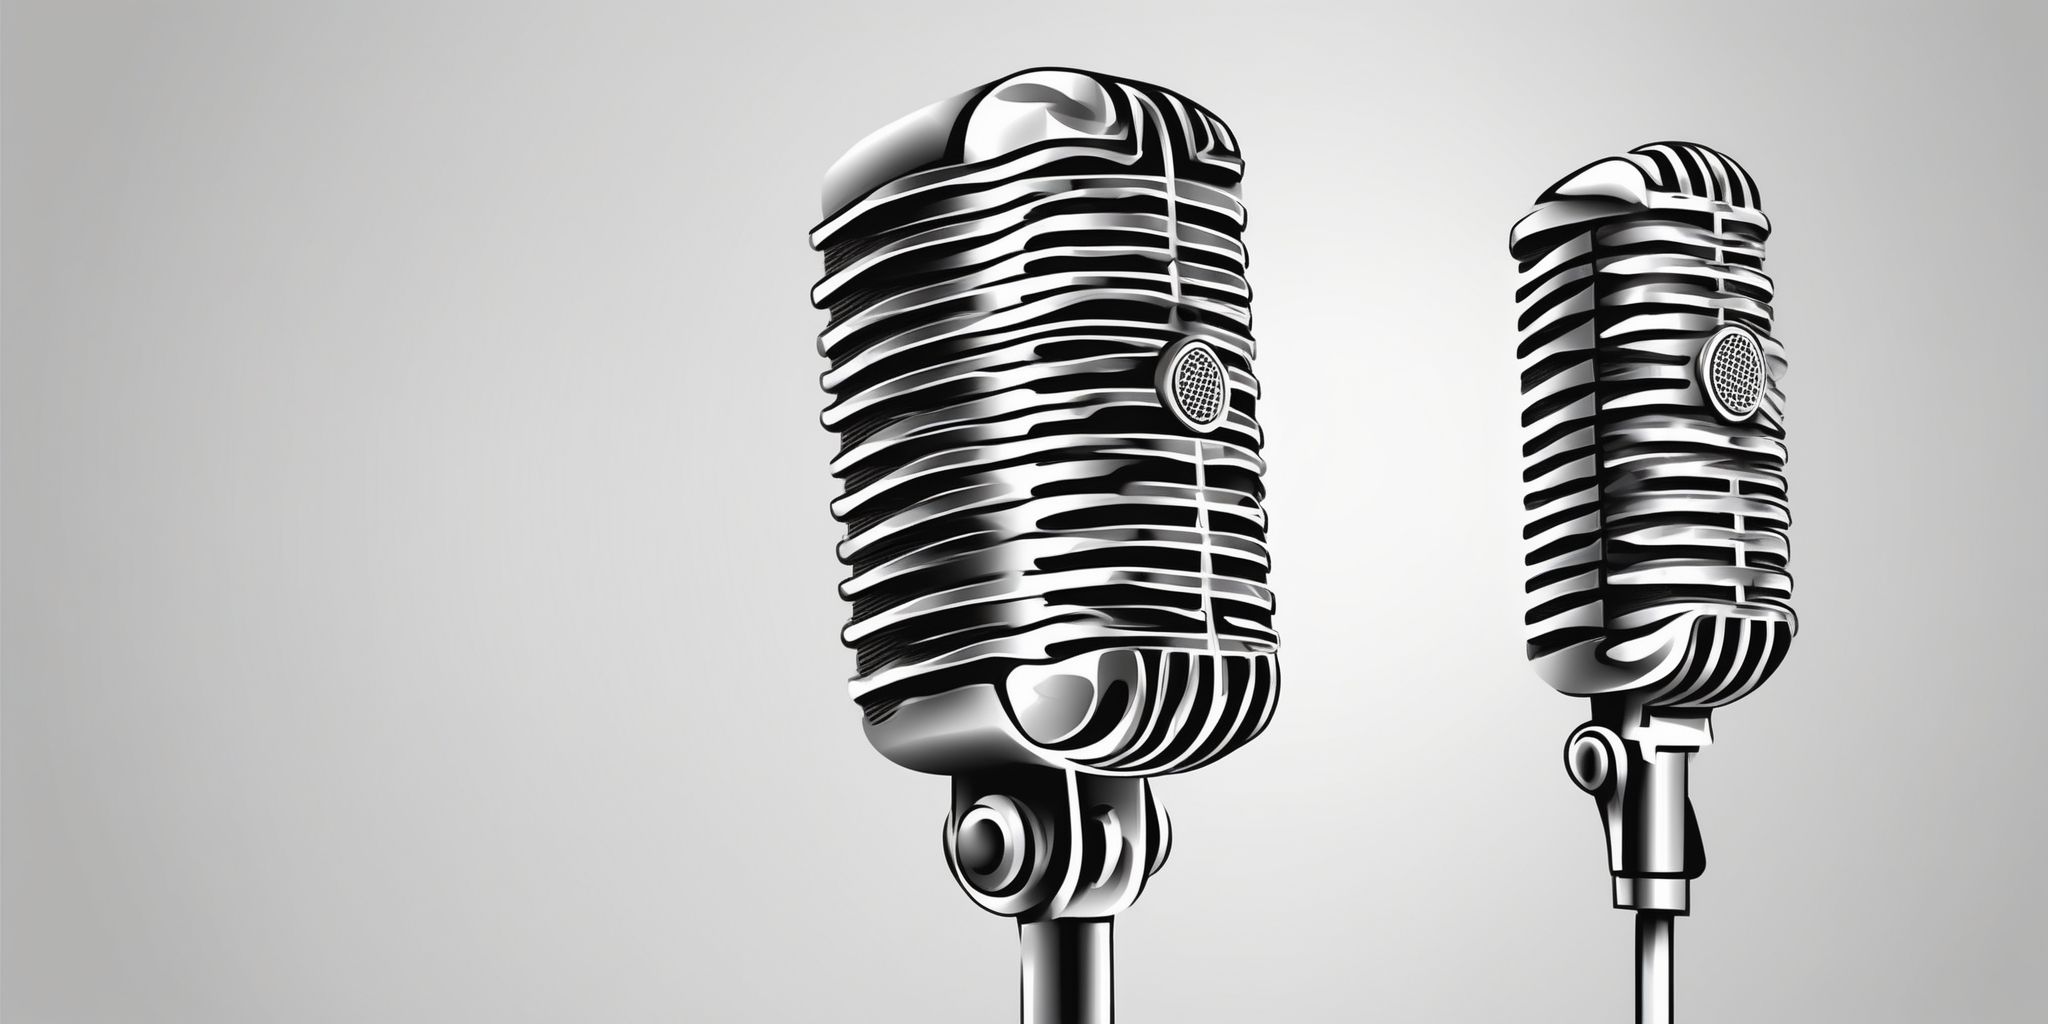 Microphone in illustration style with gradients and white background